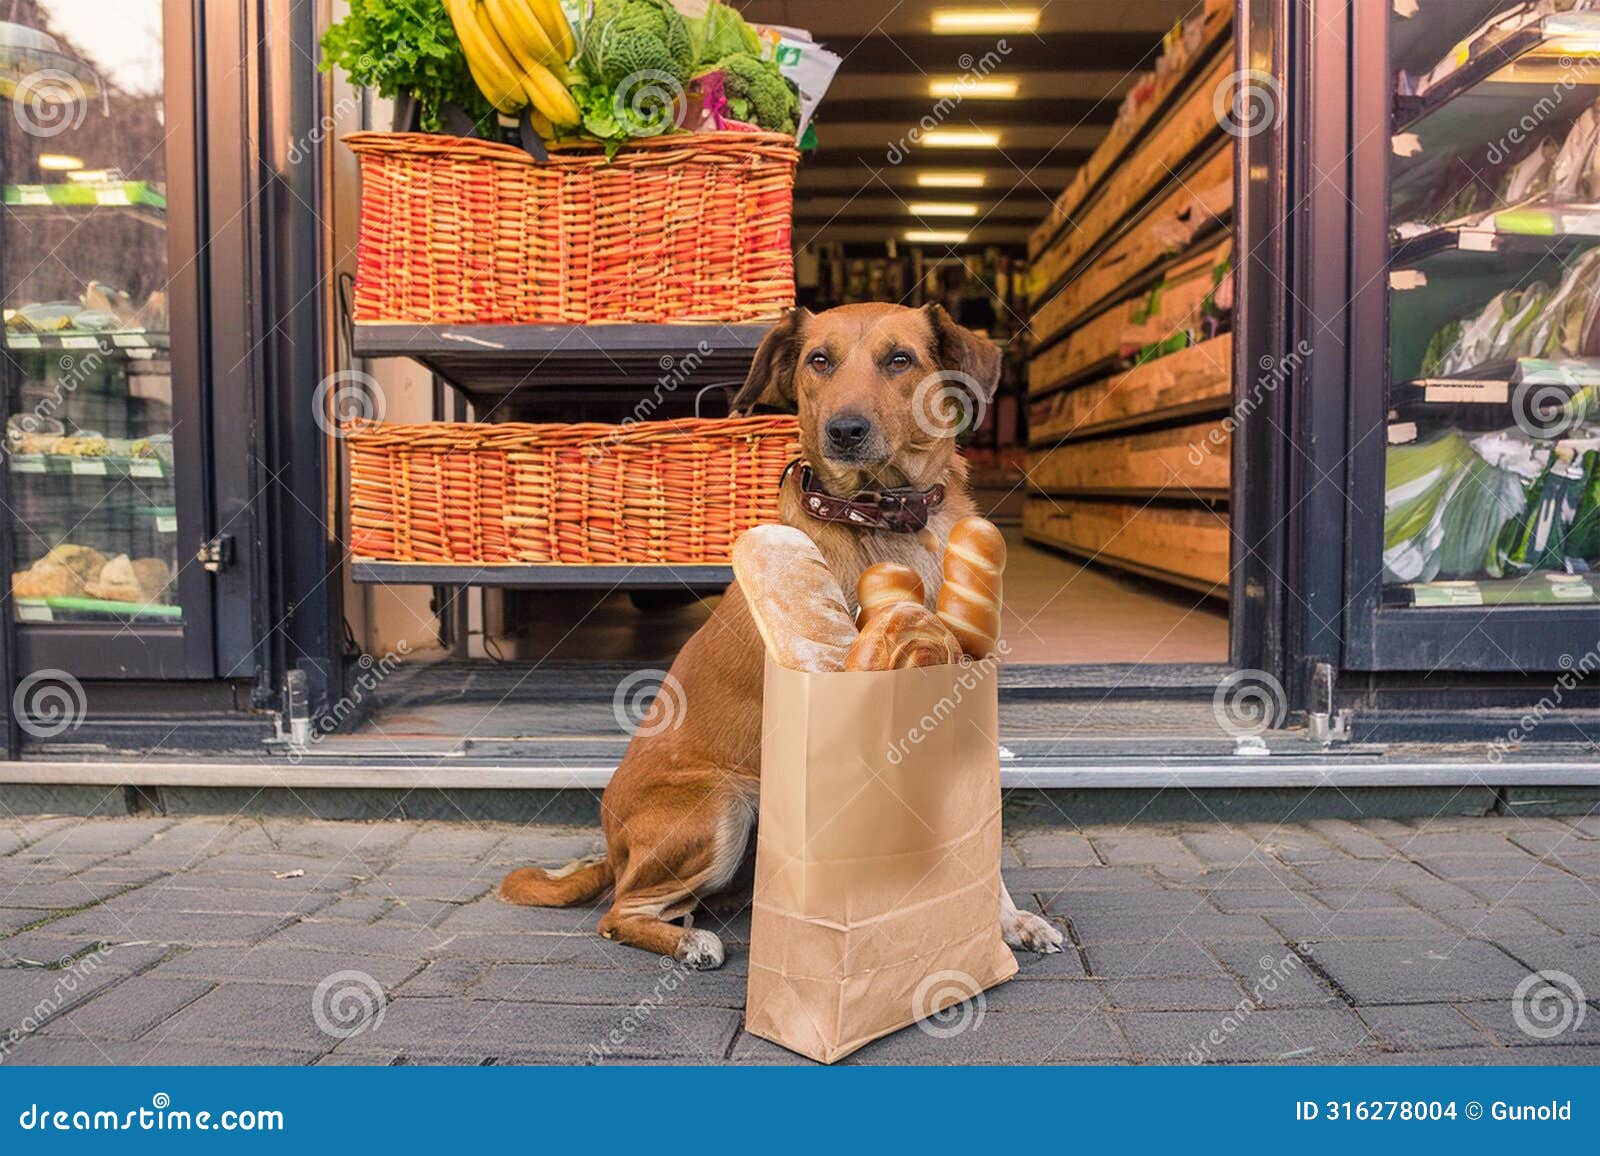 dog guards a paper bag full with bread